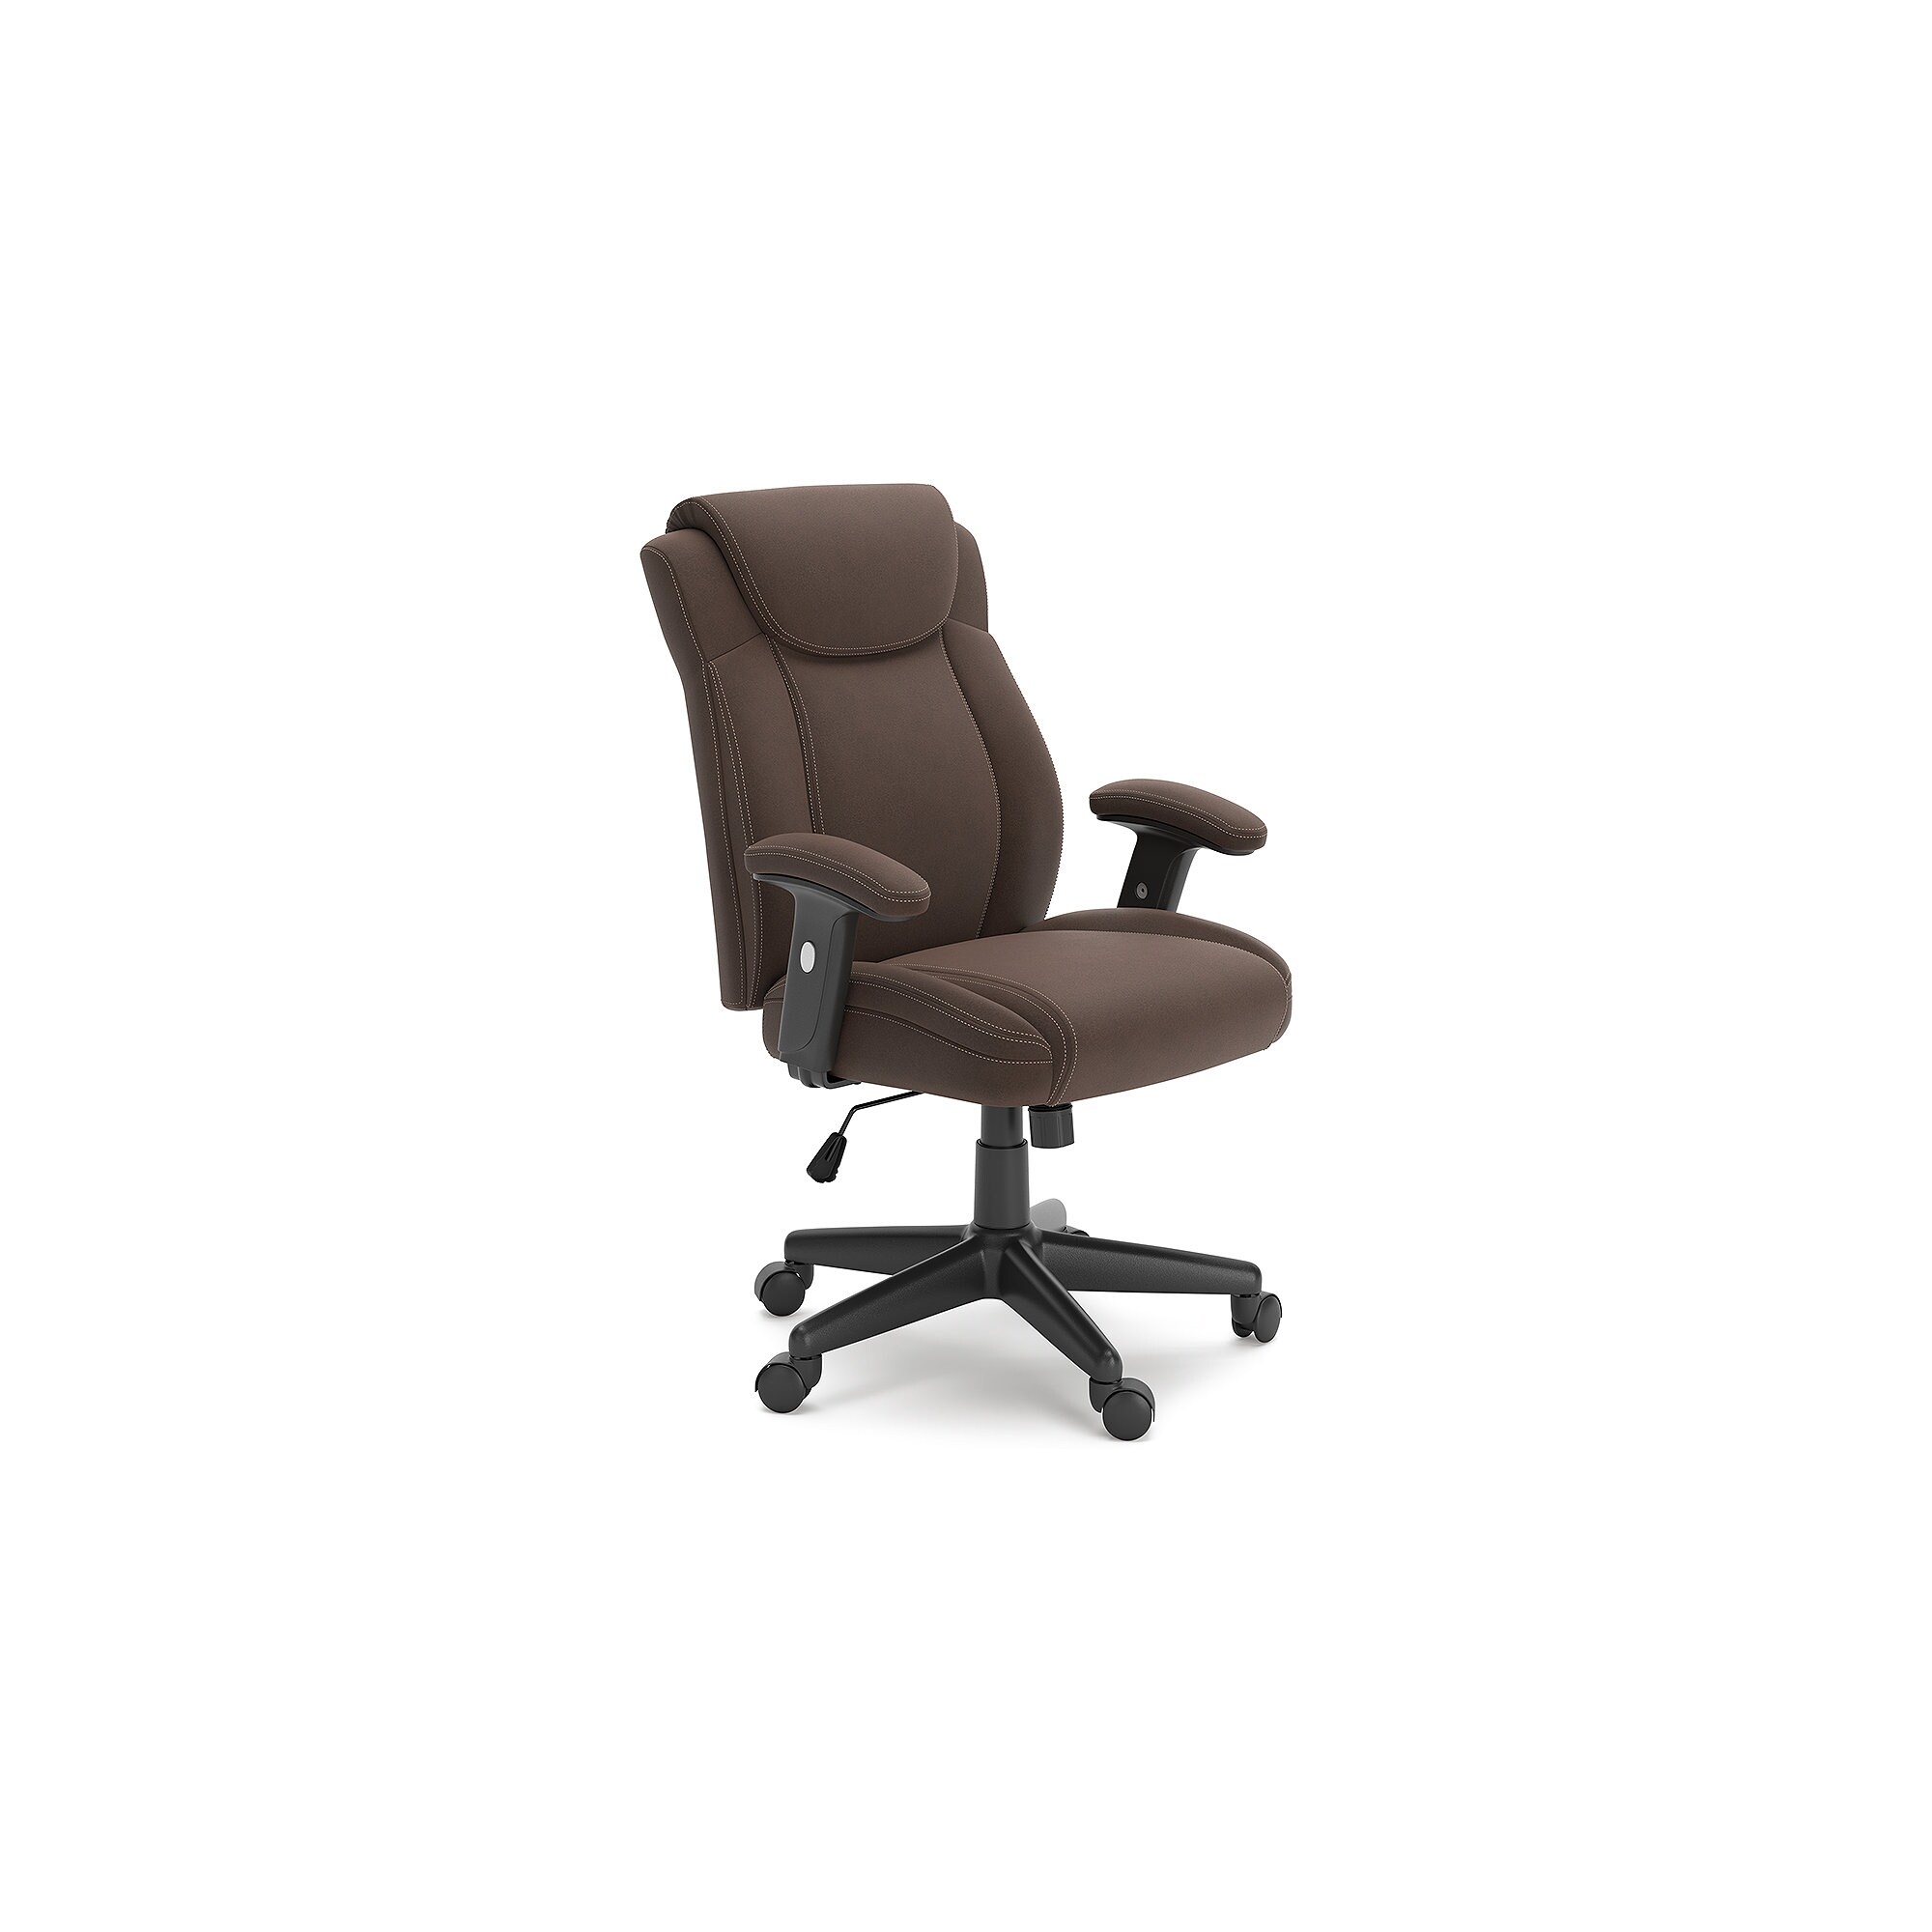 https://ak1.ostkcdn.com/images/products/is/images/direct/1ad6b5a0a85bab0082ad02ebcd4e474533353a5f/Ashley-Furniture-Corbindale-Brown-Black-Home-Office-Swivel-Desk-Chair.jpg